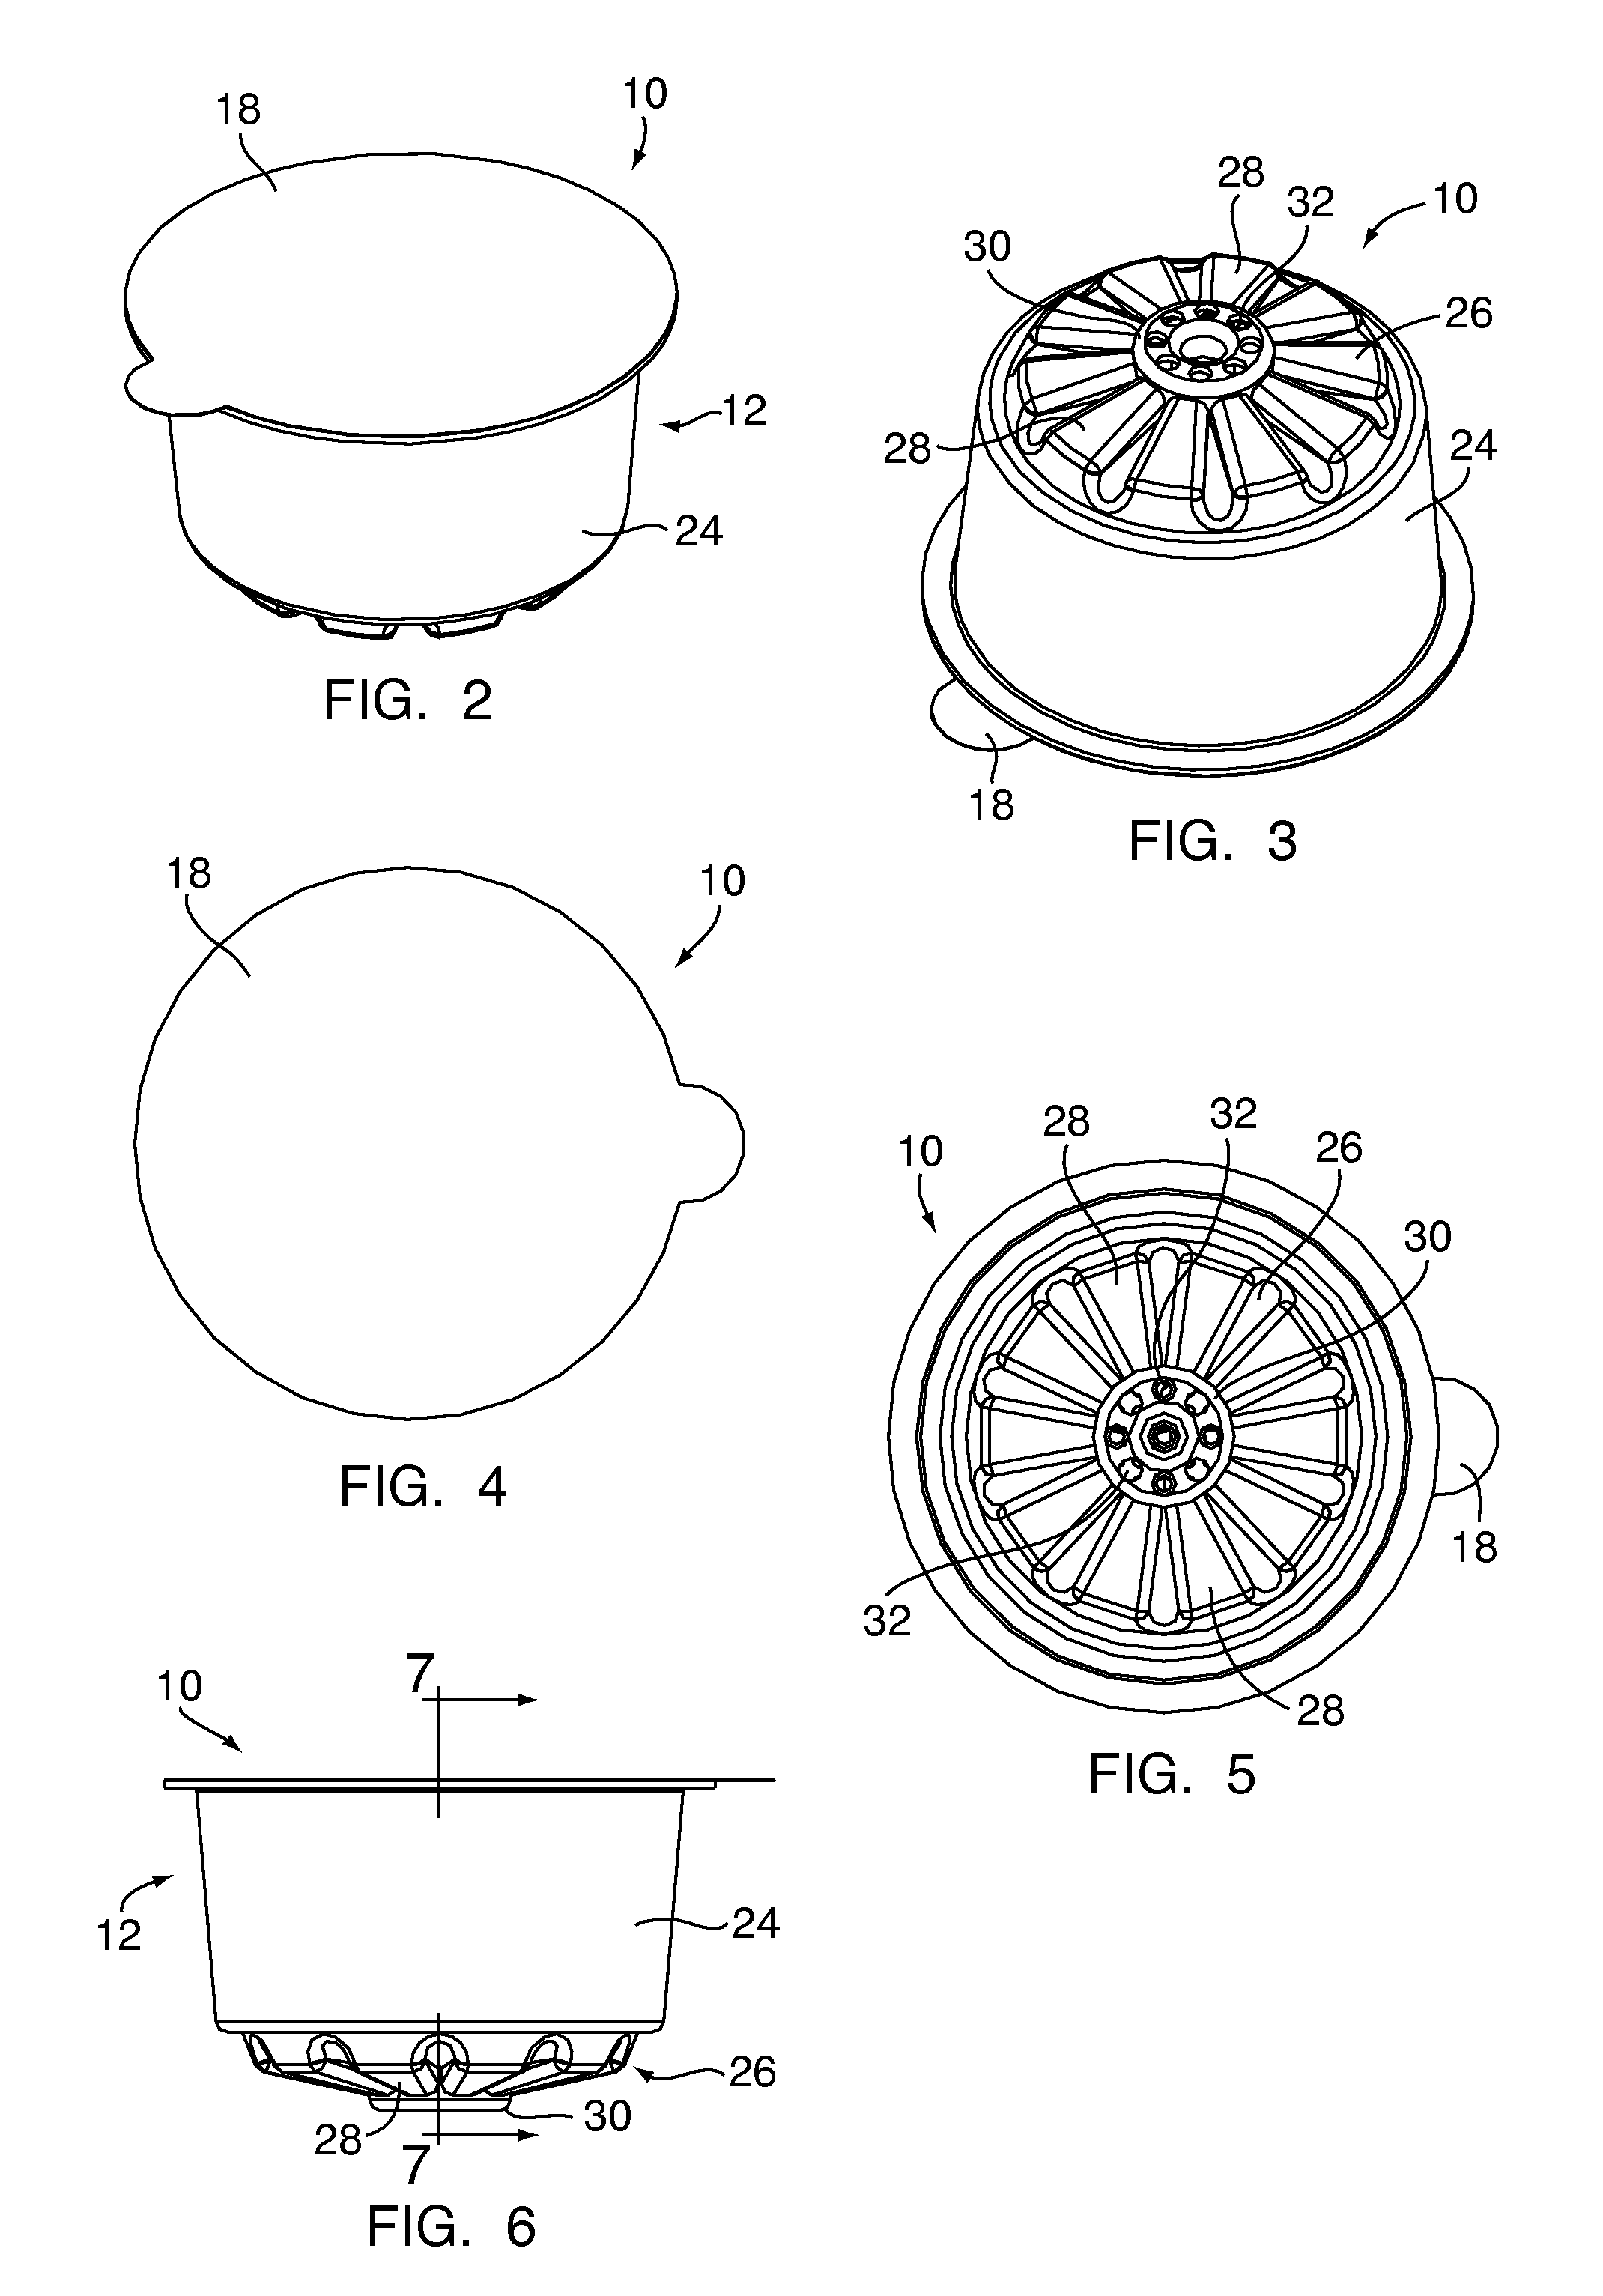 Brewed beverage appliance and method